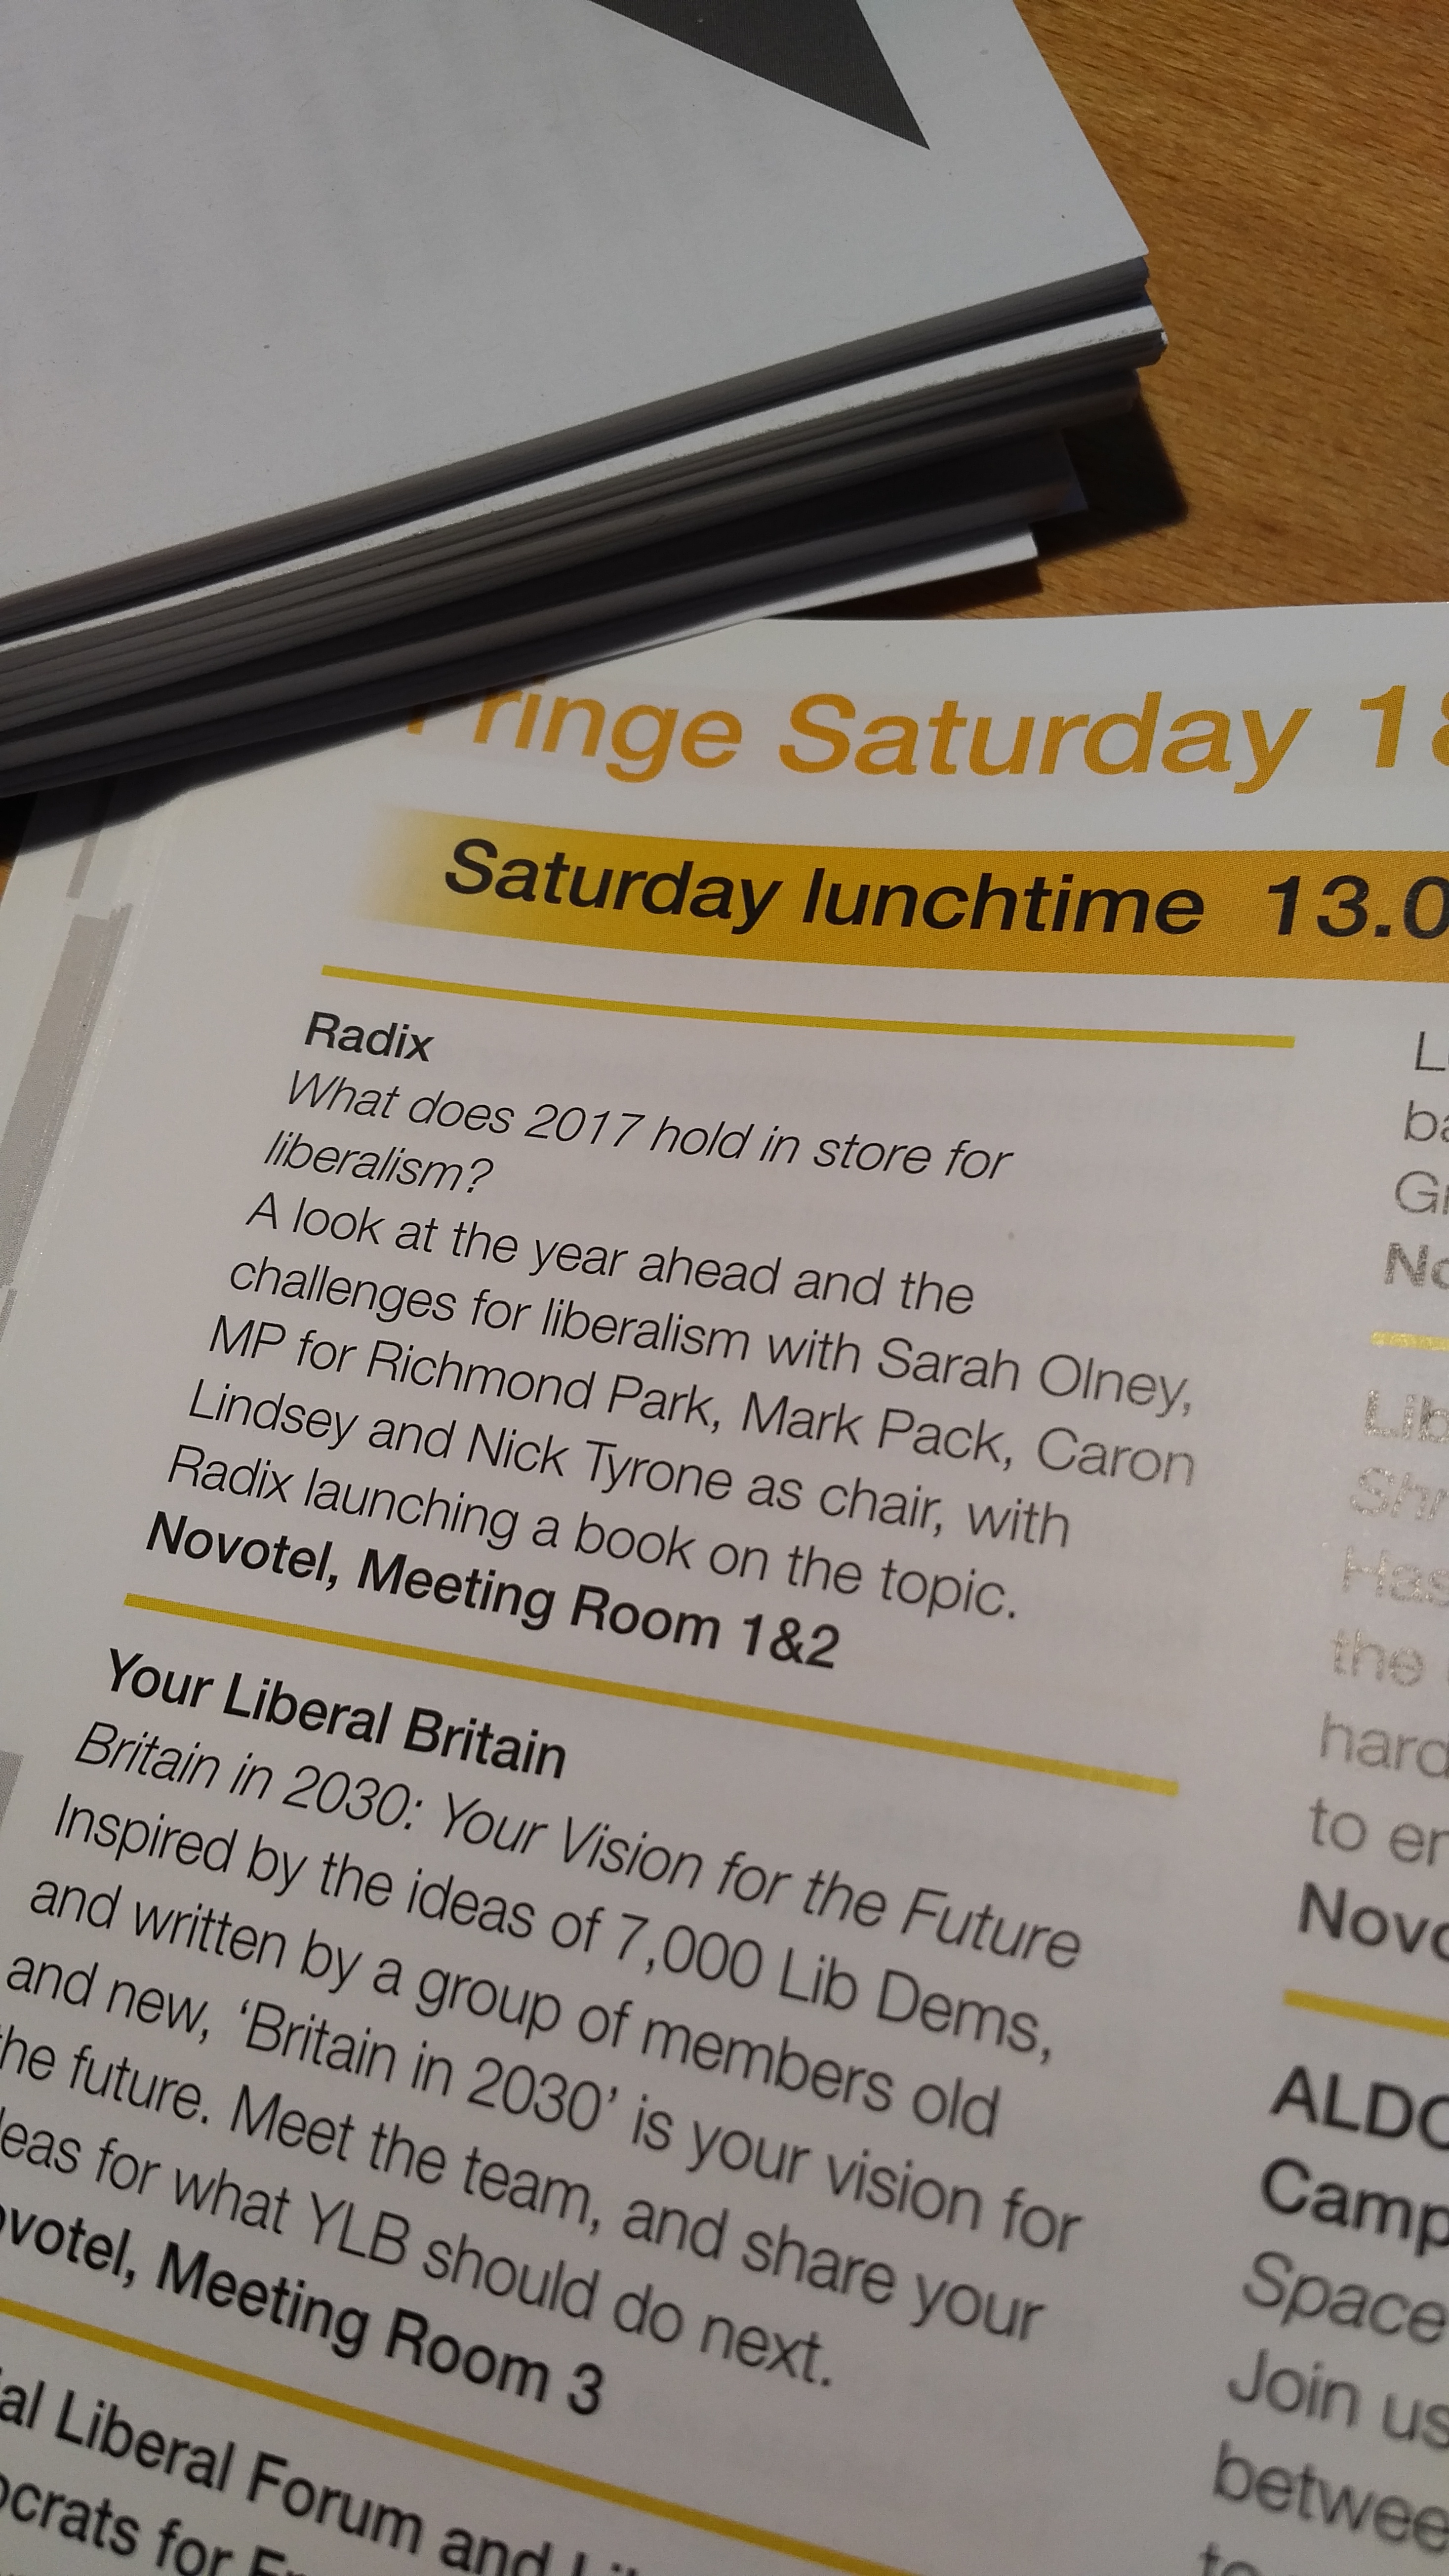 Fringe meeting listing for the Lib Dem conference: what does 2011 hold in store for liberalism?